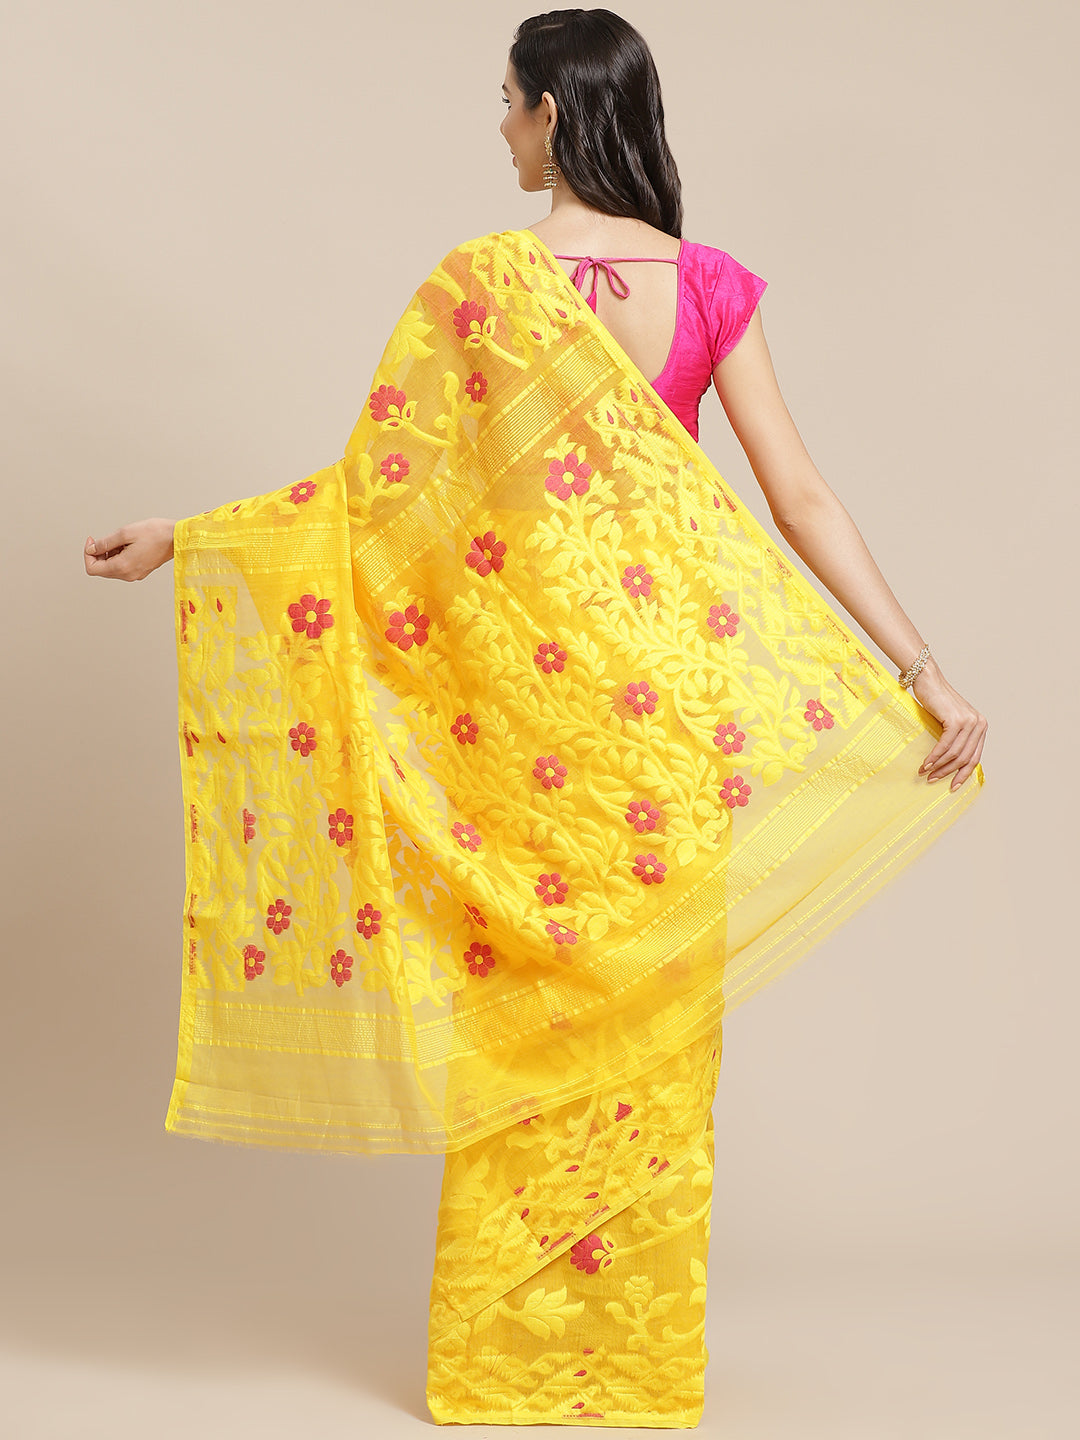 Yellow and Cream, Kalakari India Jamdani Silk Cotton Woven Design Saree without blouse CHBHSA0035-Saree-Kalakari India-CHBHSA0035-Bengal, Geographical Indication, Hand Crafted, Hand Painted, Heritage Prints, Jamdani, Natural Dyes, Red, Sarees, Silk Blended, Sustainable Fabrics, Woven, Yellow-[Linen,Ethnic,wear,Fashionista,Handloom,Handicraft,Indigo,blockprint,block,print,Cotton,Chanderi,Blue, latest,classy,party,bollywood,trendy,summer,style,traditional,formal,elegant,unique,style,hand,block,pri